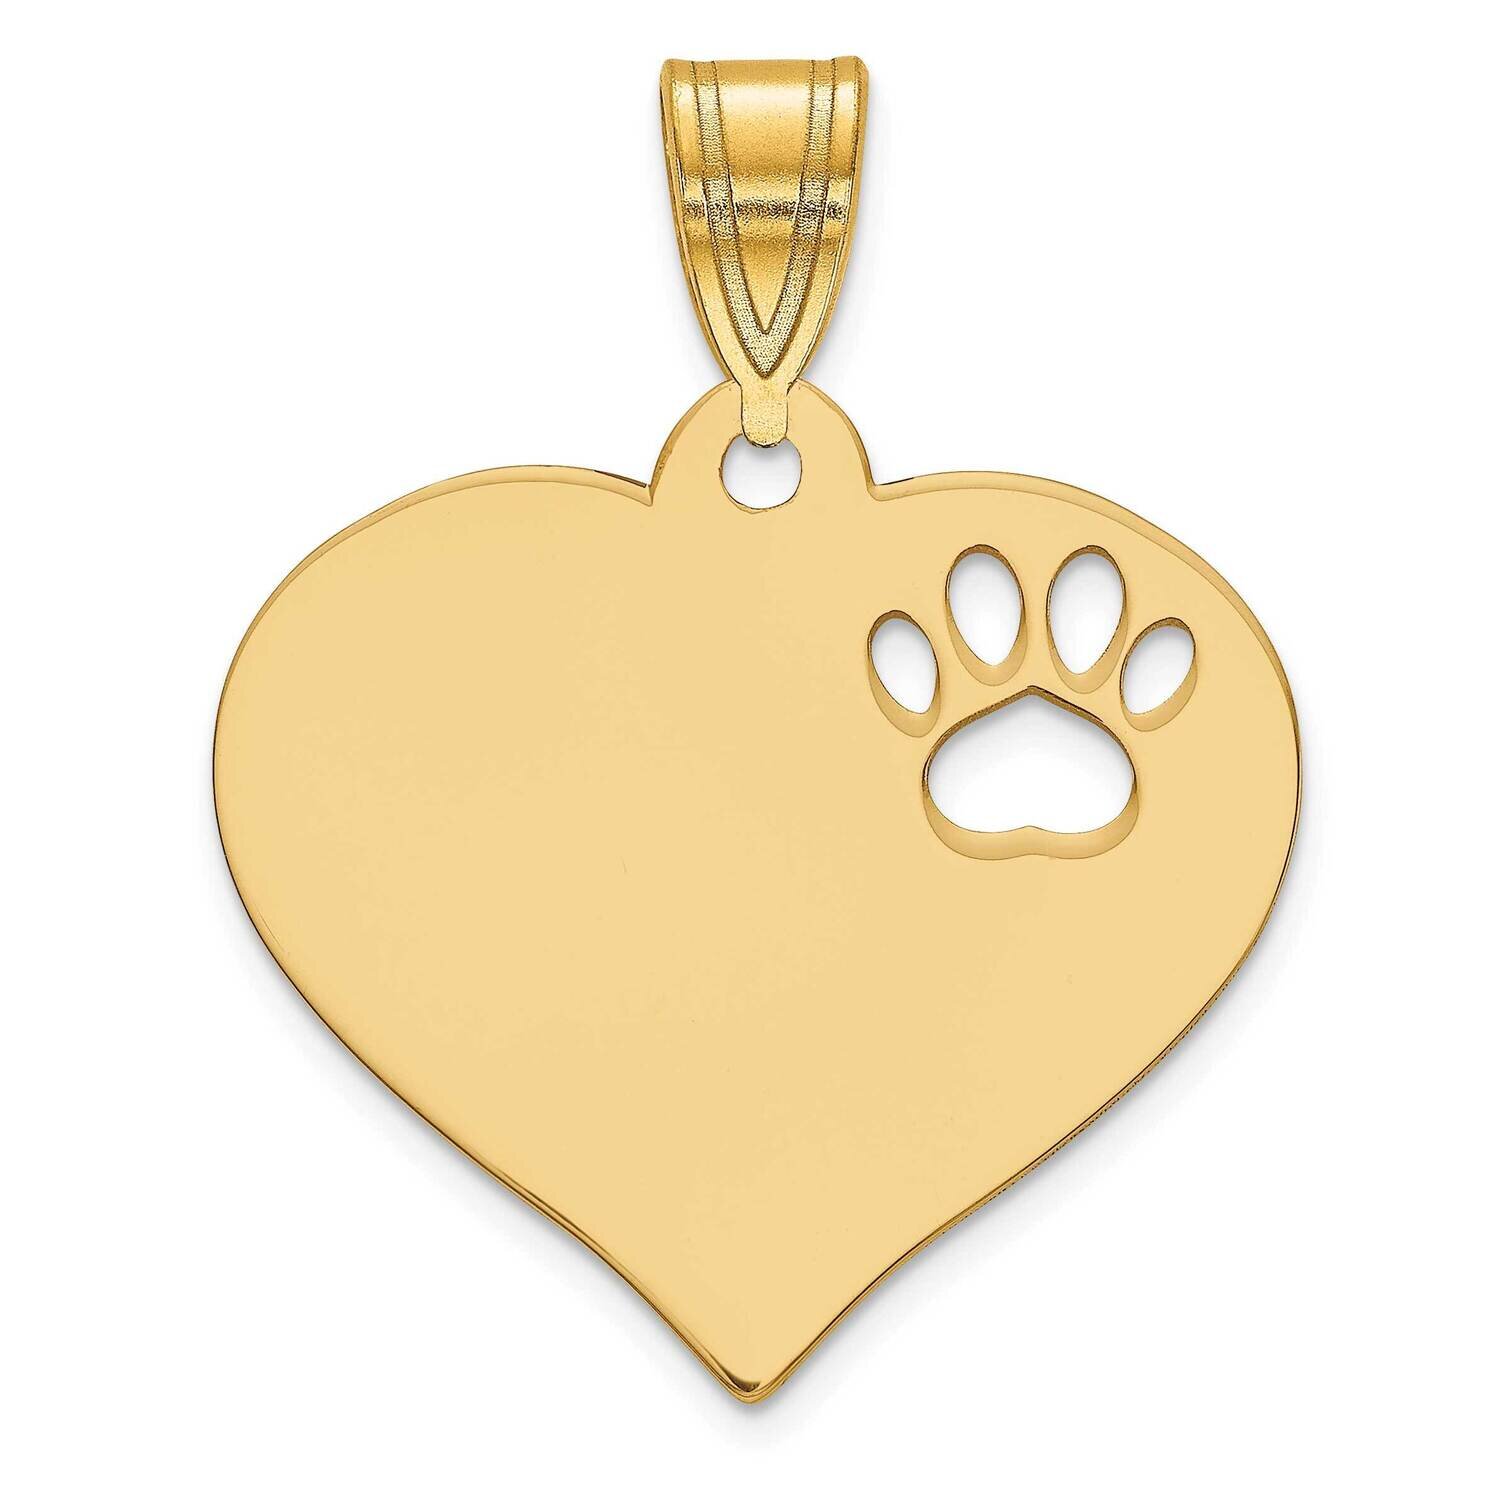 Heart Pendant with Pawprint Cutout Gold Plated Sterling Silver XNA767GP